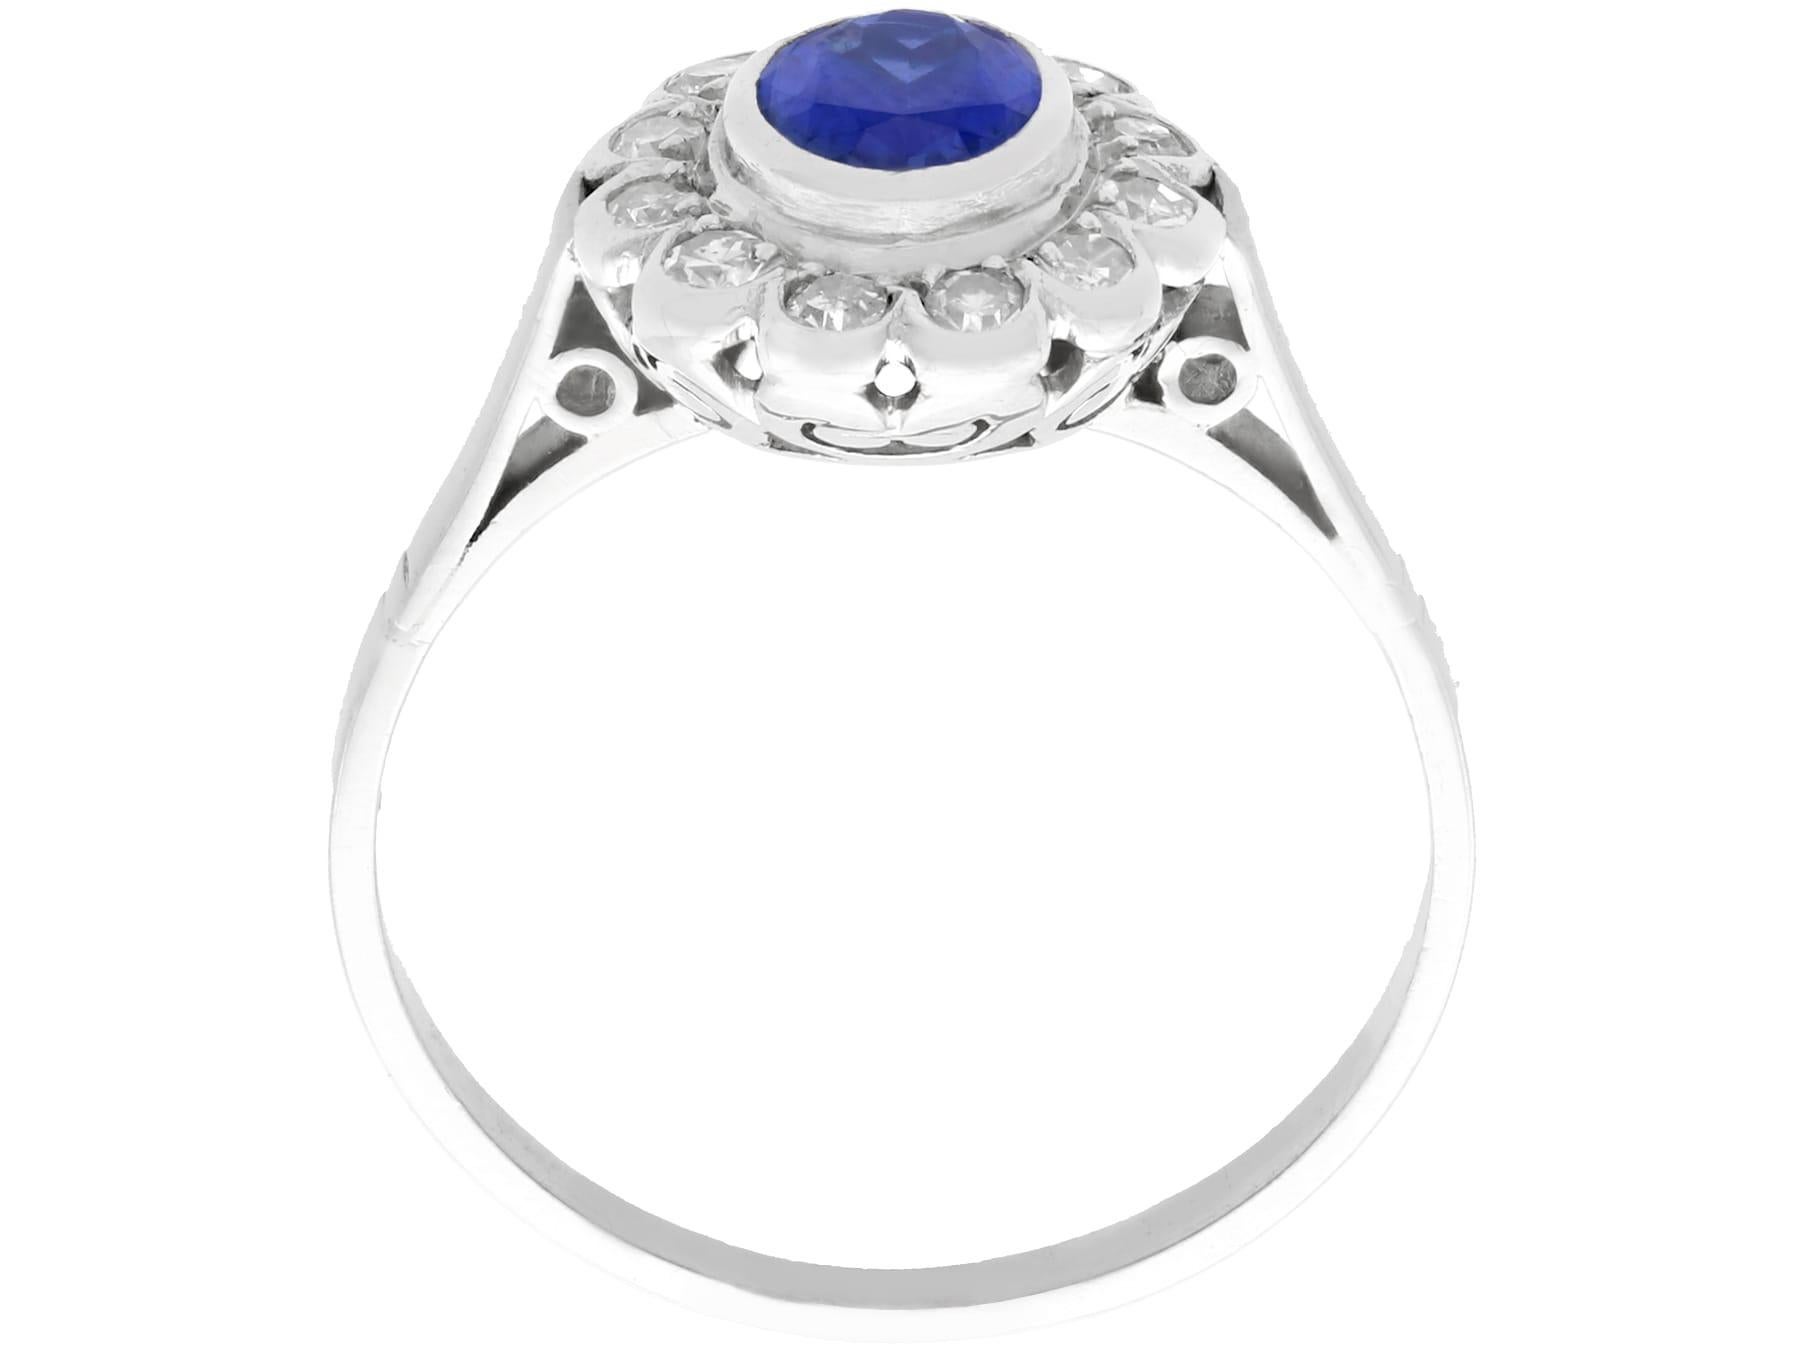 1.12 Carat Oval Cut Sapphire and Diamond Platinum Cluster Ring Circa 1930 For Sale 1